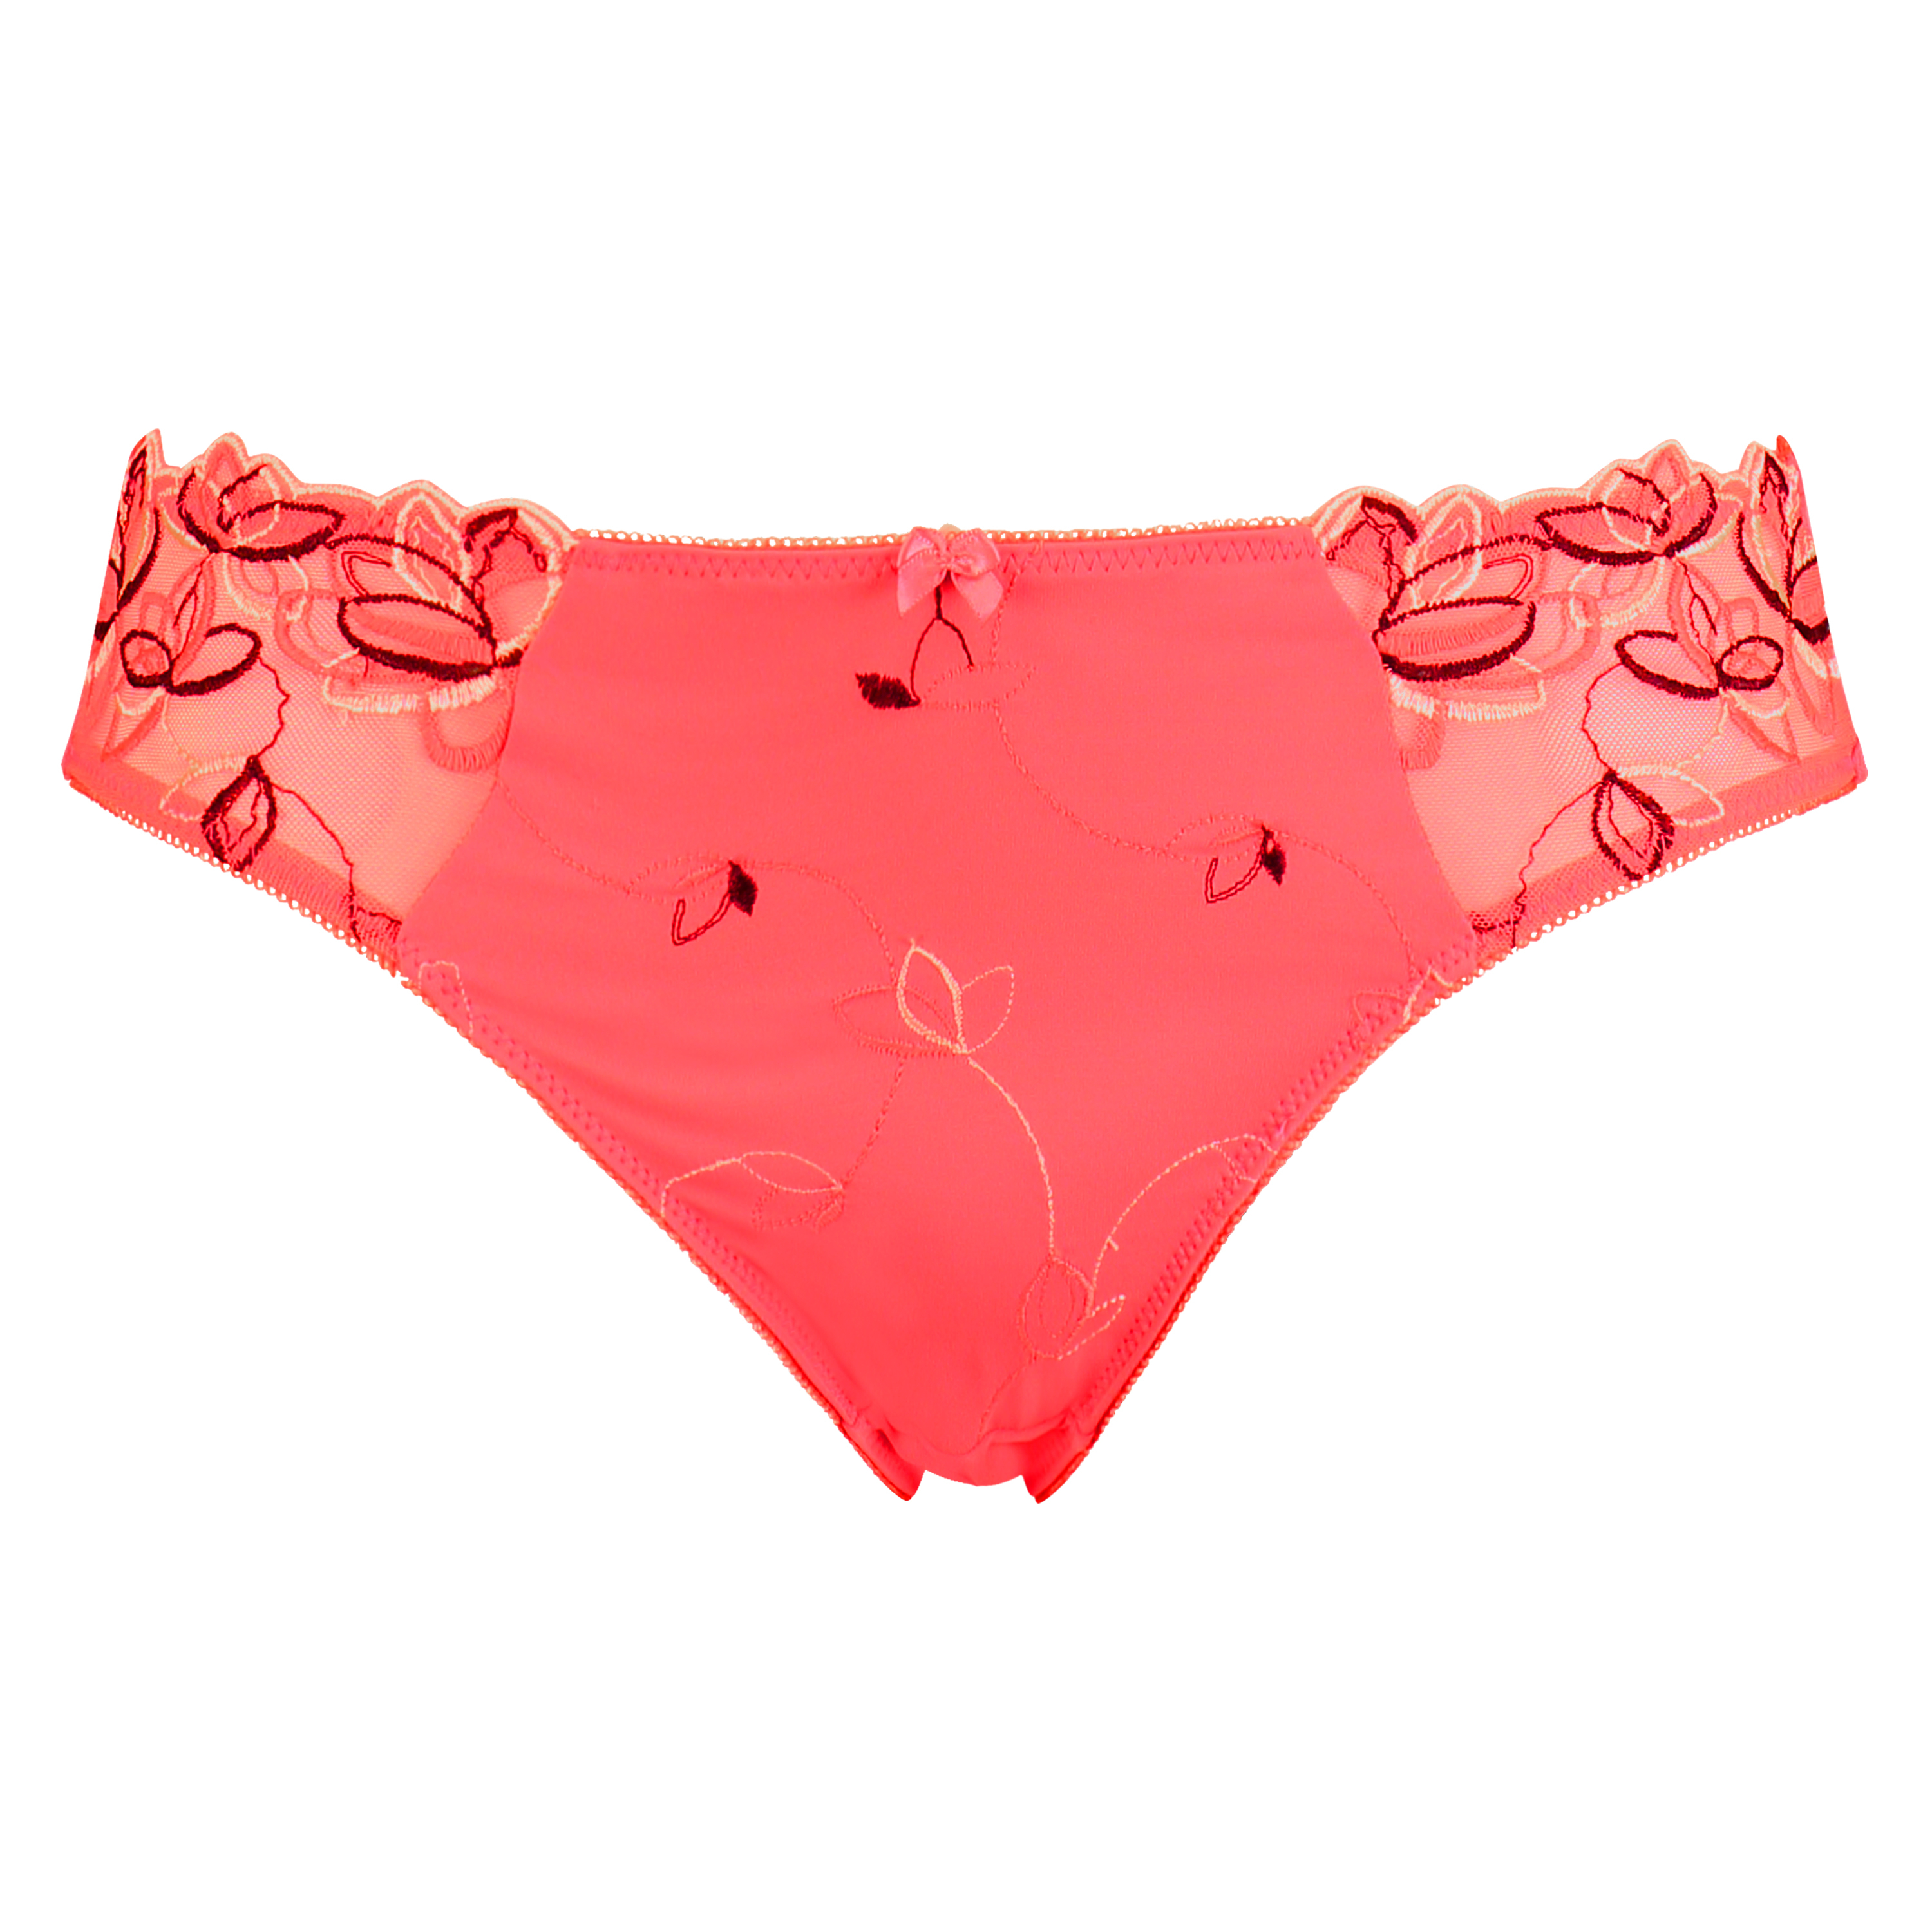 Diva knickers, Red, main